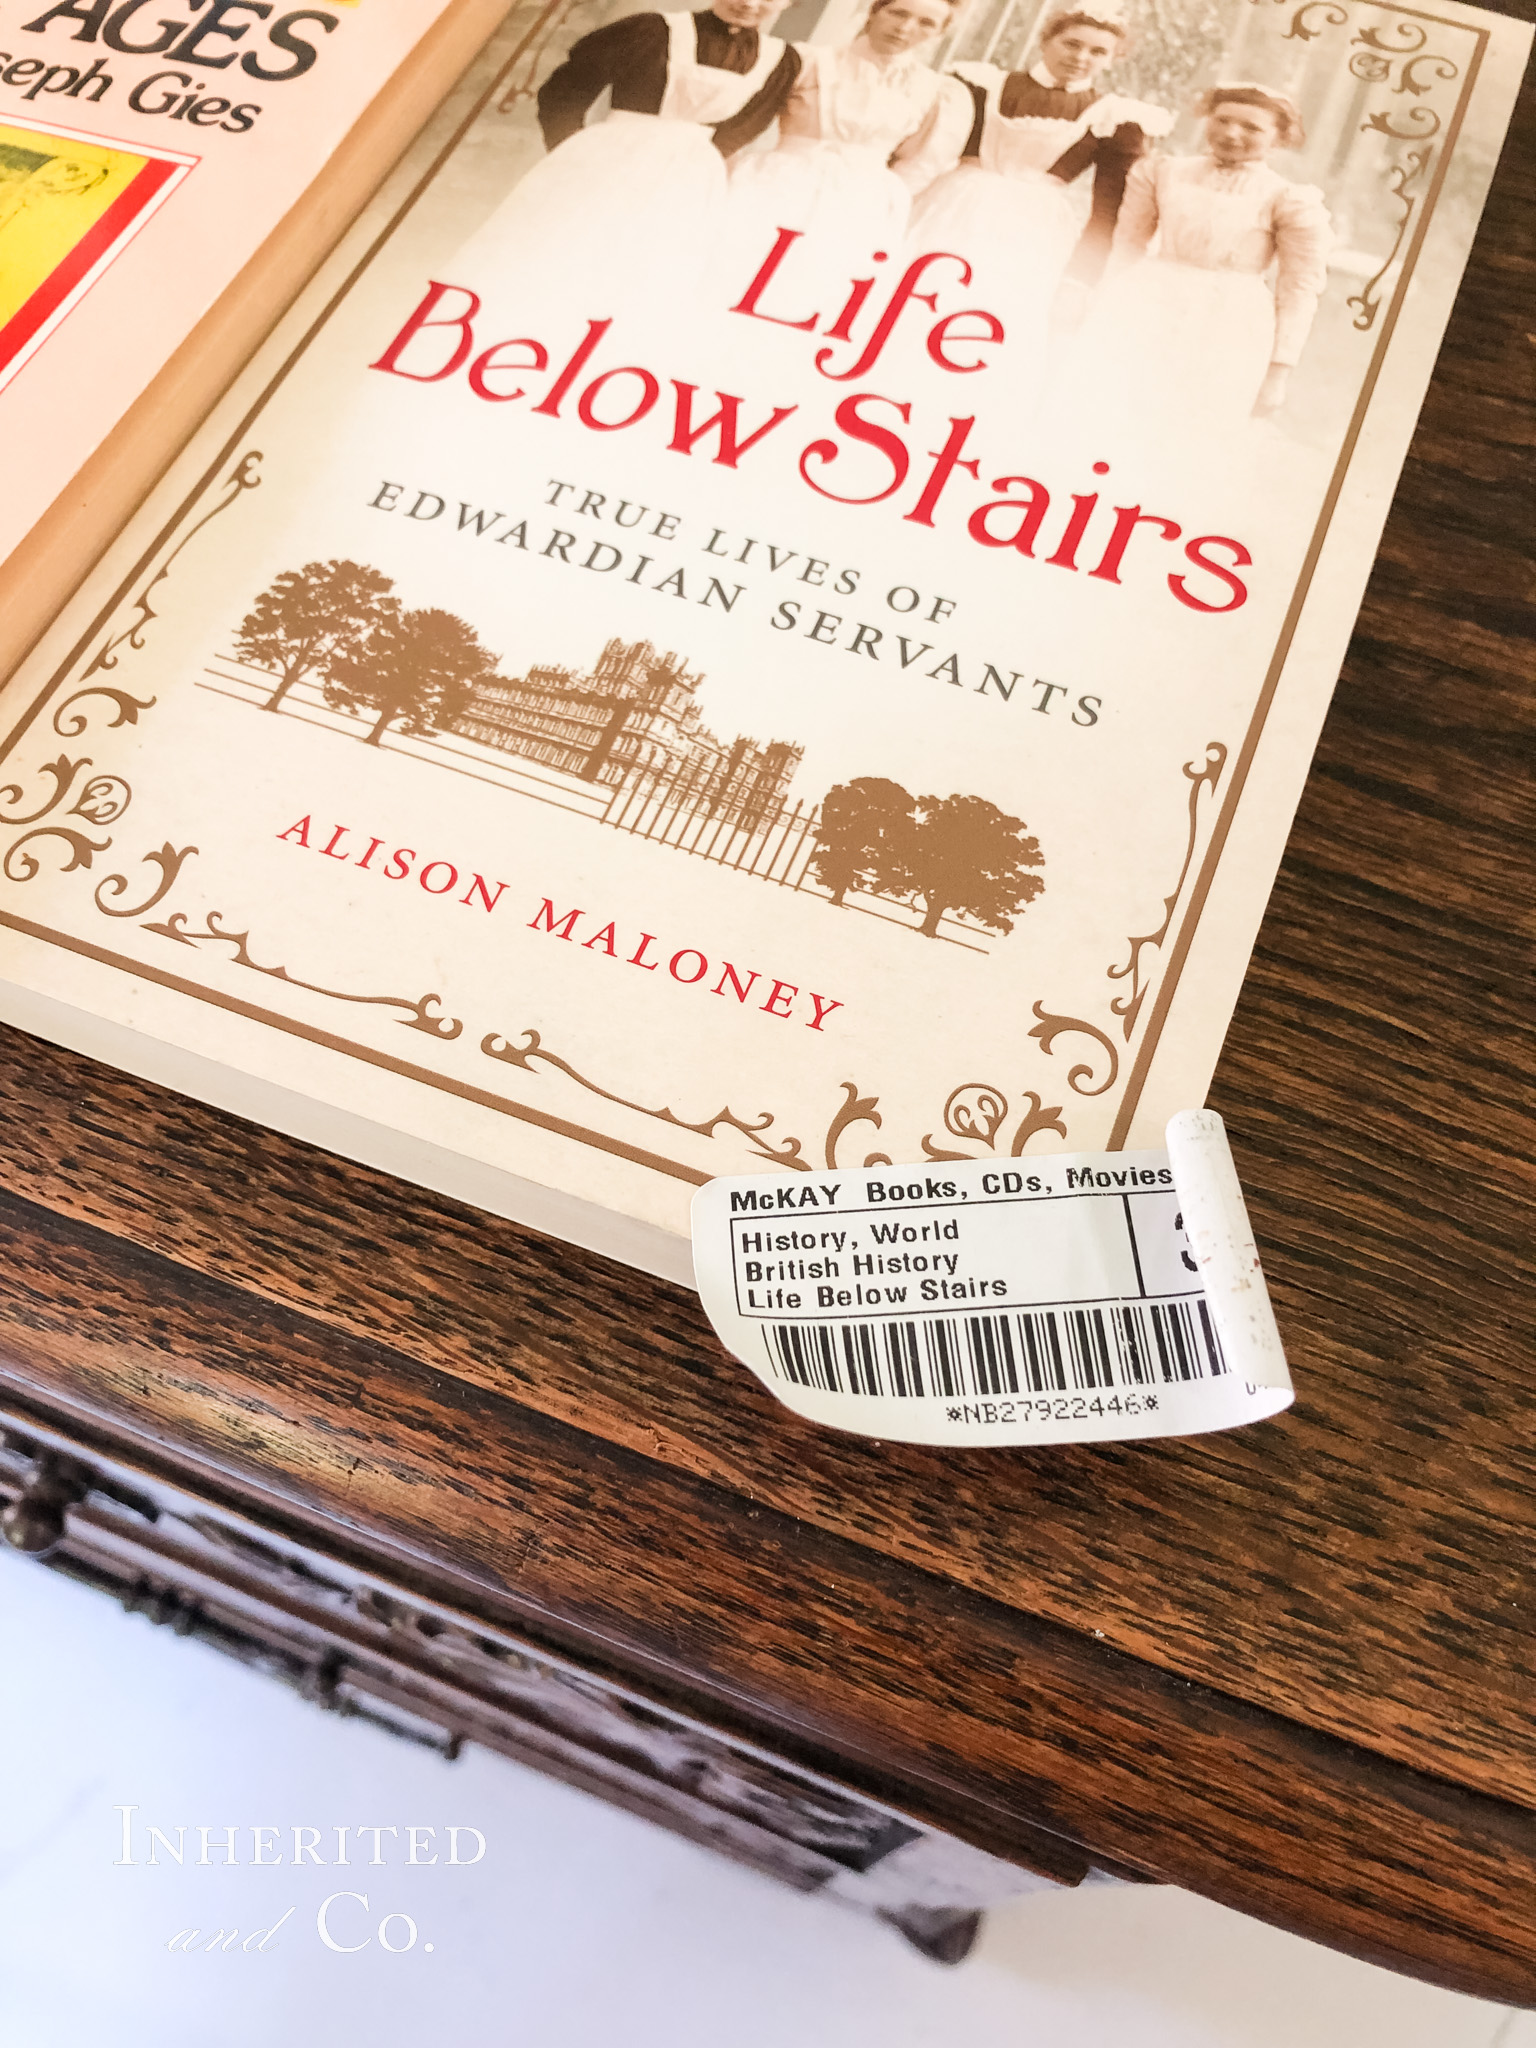 Price tag on the book Life Below Stairs from McKay's Nashville